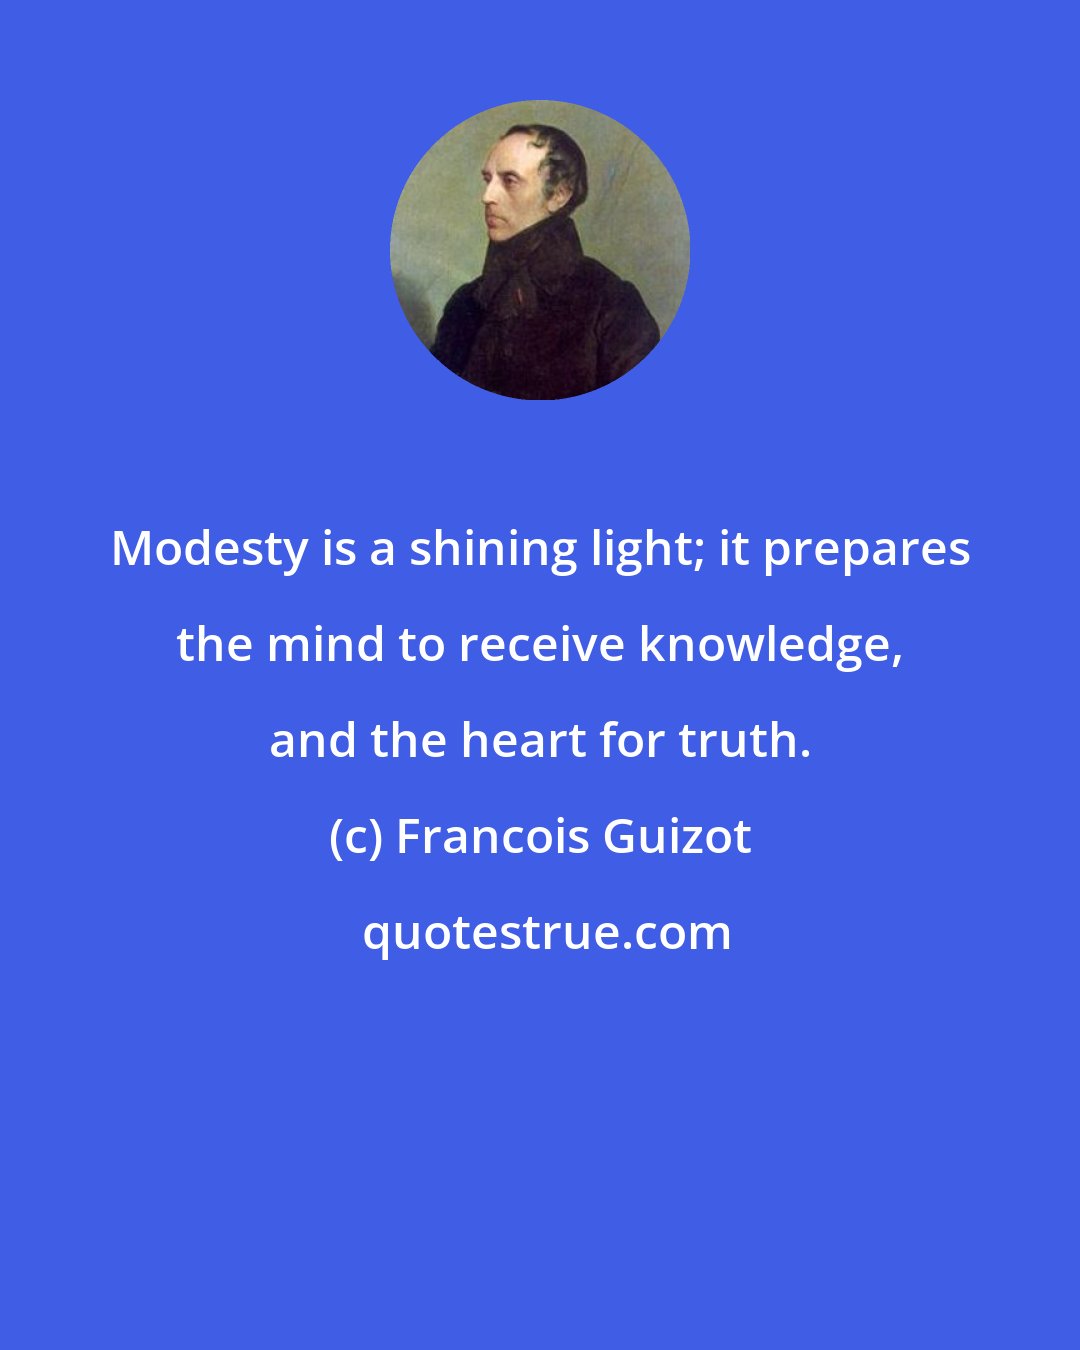 Francois Guizot: Modesty is a shining light; it prepares the mind to receive knowledge, and the heart for truth.